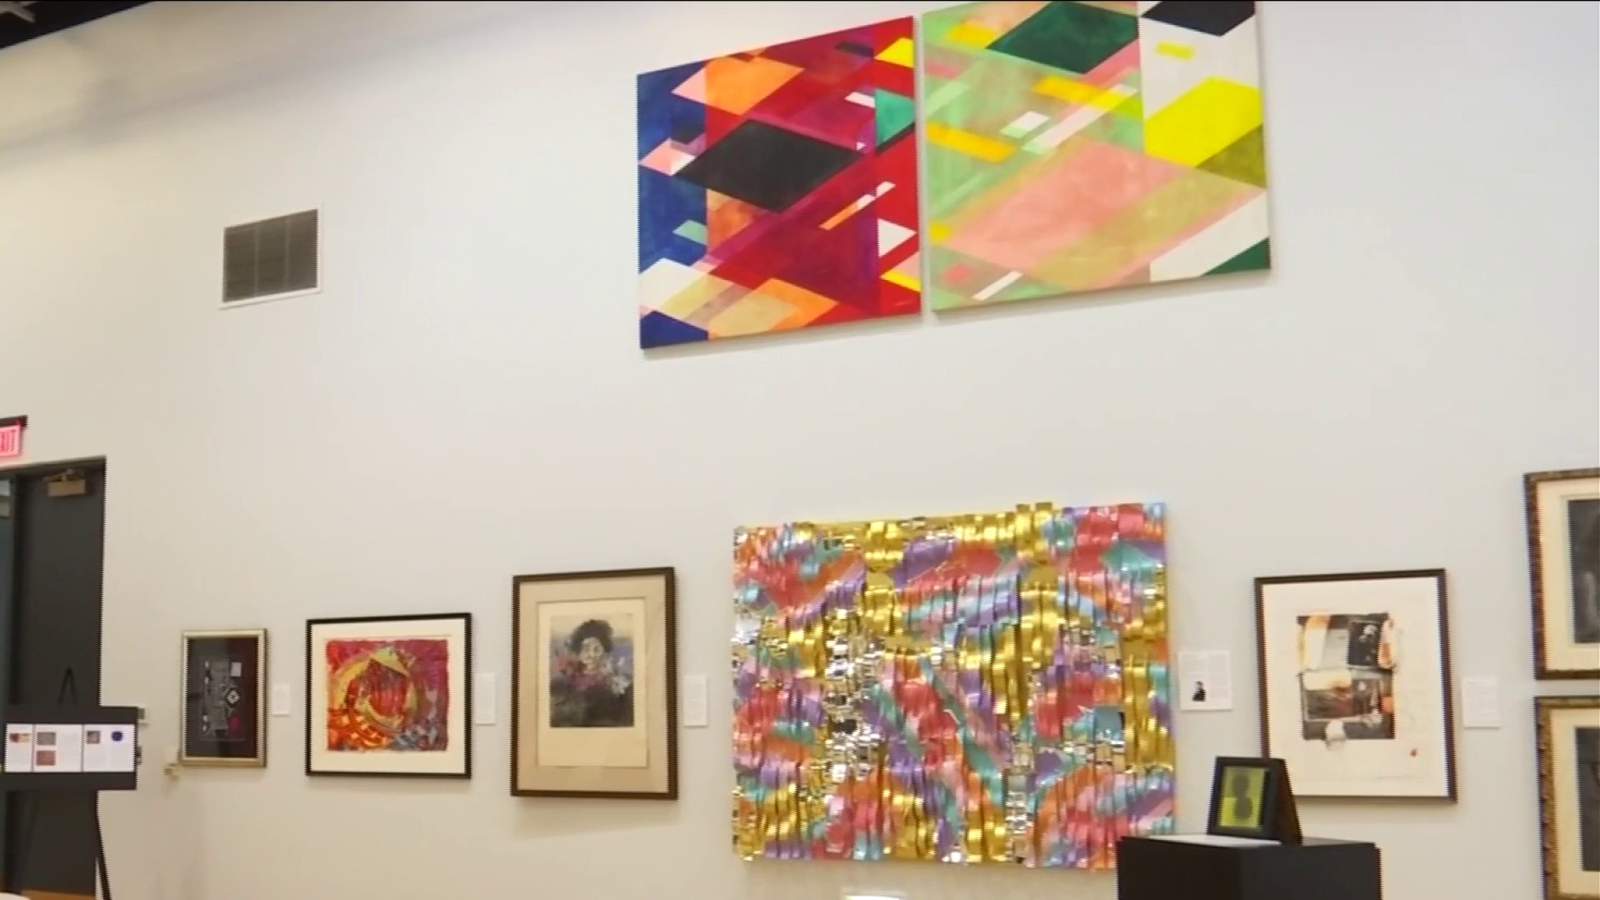 Picasso, Warhol among those featured in new Radford University art exhibit